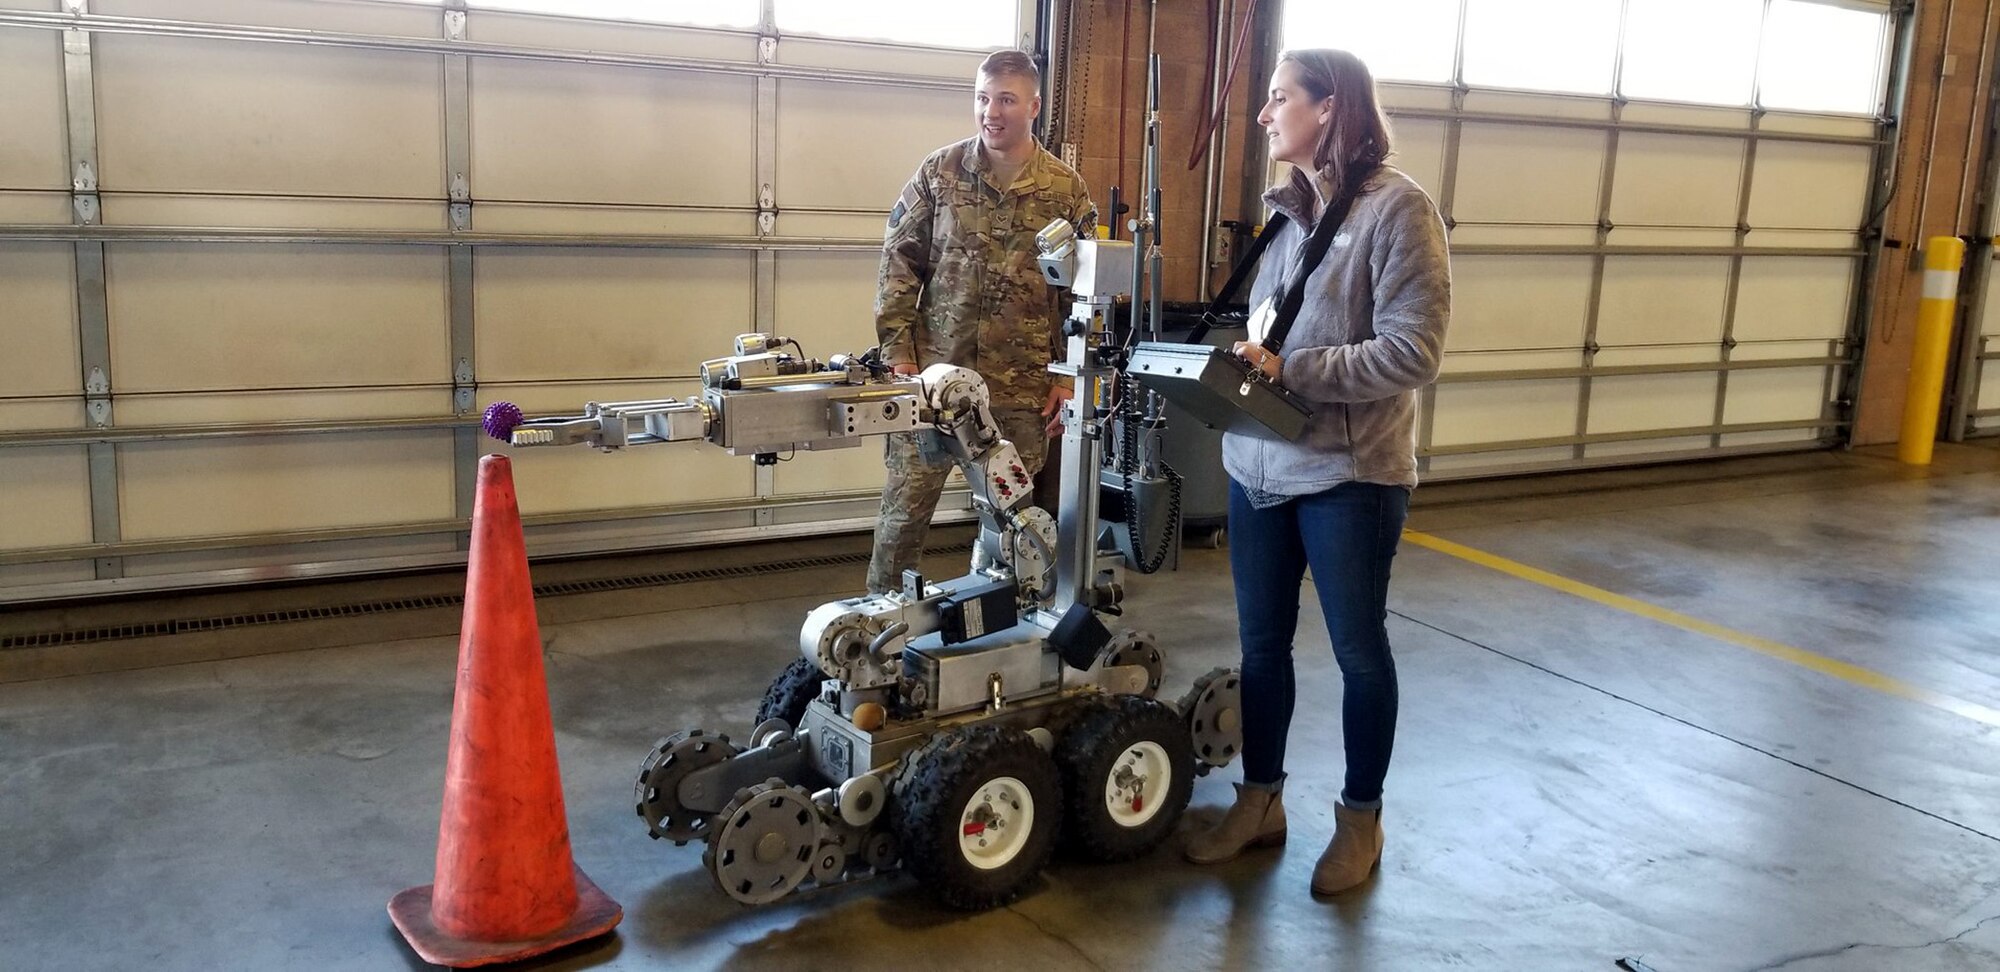 60th Explosive Ordinance Disposal Airman helps Christi Coors Ficeli maneuver a robot to retrieve an "explosive" device. She is the HC to 349th Mission Support Group commander, Col. Rod Grunwald.